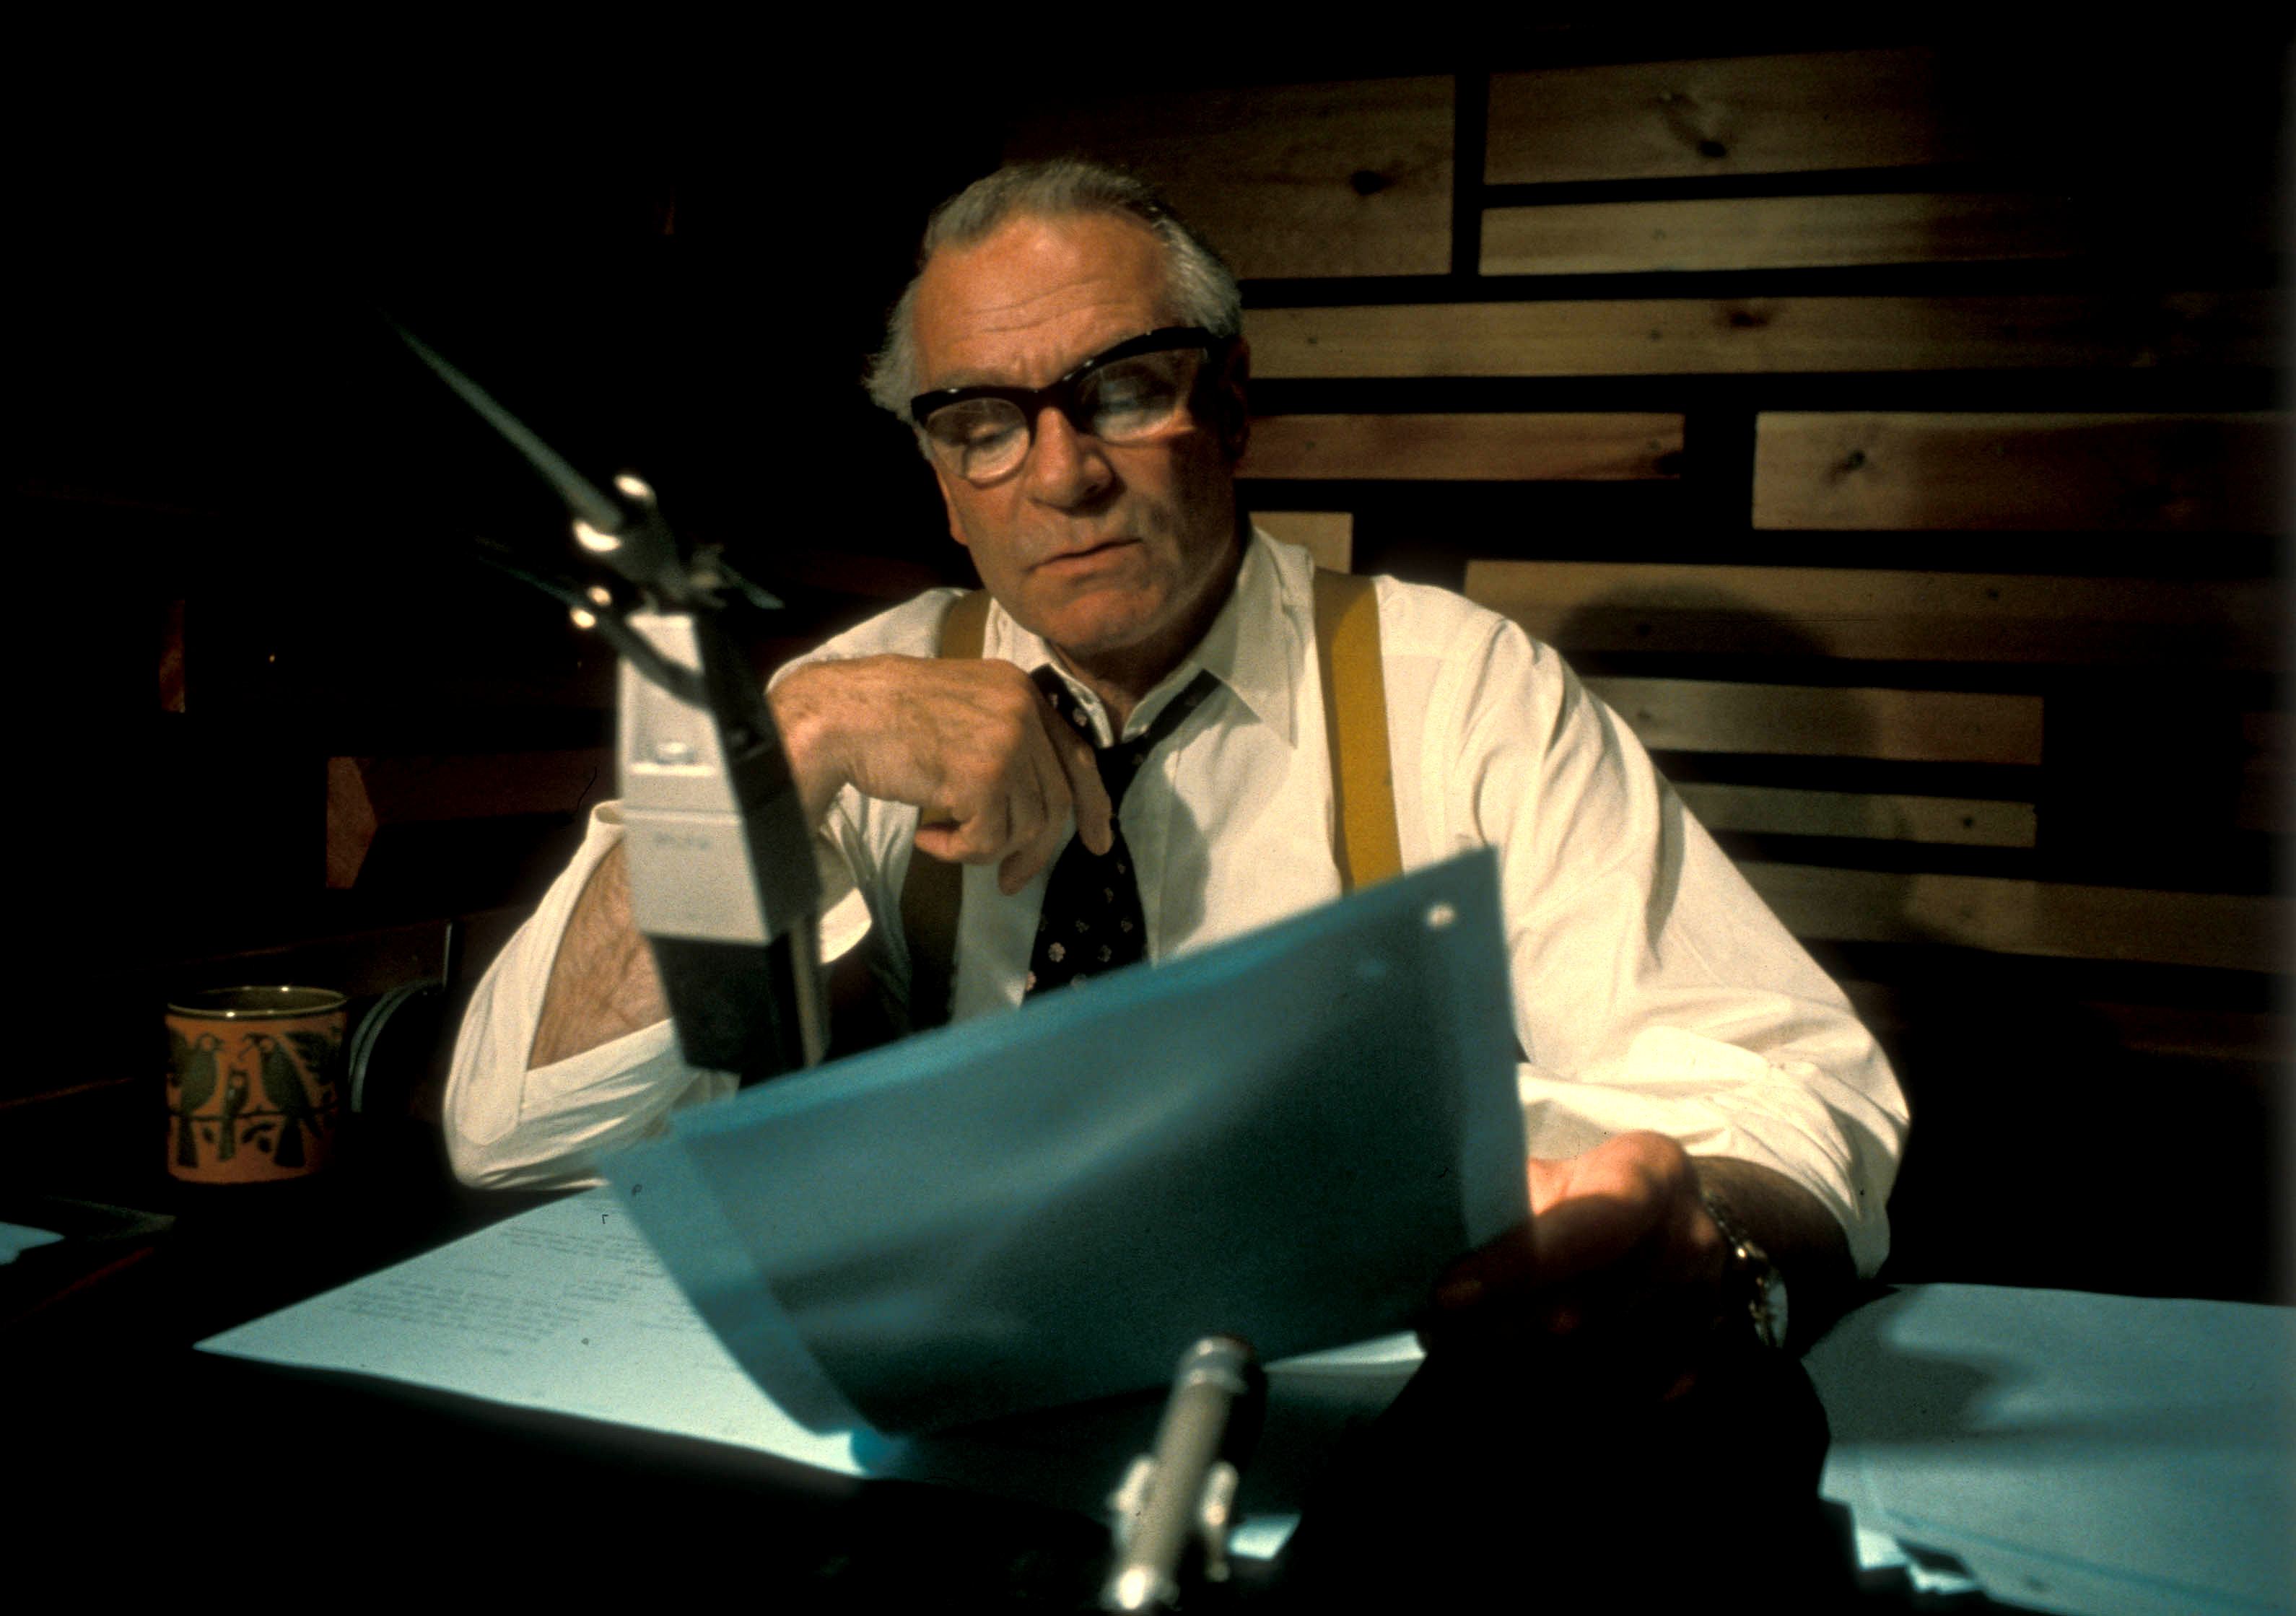 Photo of Laurence Oliver narrating The World at War (1973-4). The actor is in rolled-up shirt sleeves while reading the script in front of a microphone